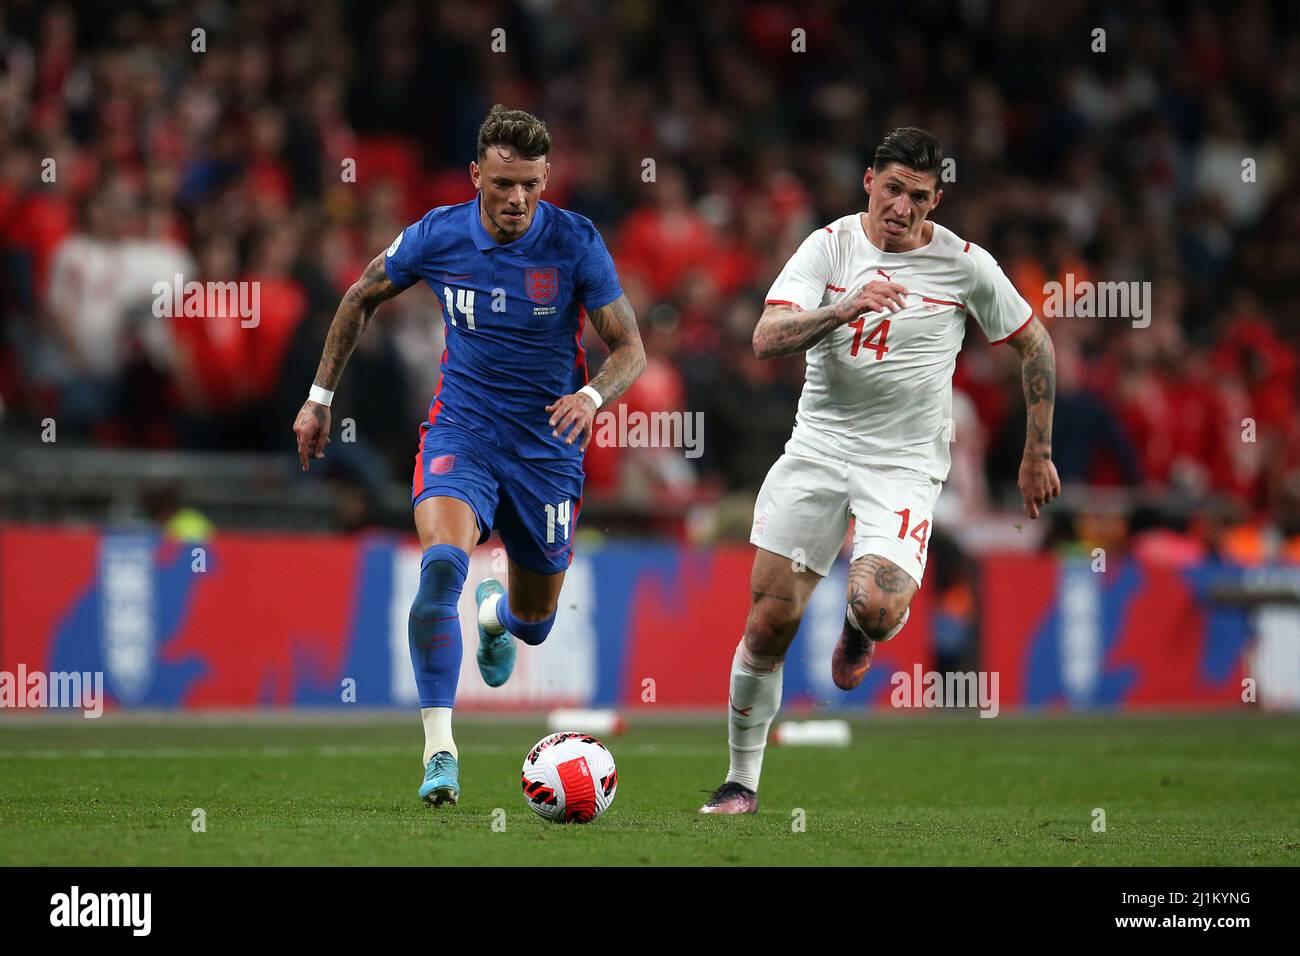 London, UK. 26th Mar, 2022. Ben White of England (l) runs past Steven Zuber of Switzerland. England v Switzerland, International football friendly designated Alzheimer's Society International match at Wembley Stadium in London on Saturday 26th March 2022. Editorial use only. pic by Andrew Orchard/Andrew Orchard sports photography/Alamy Live News Credit: Andrew Orchard sports photography/Alamy Live News Stock Photo